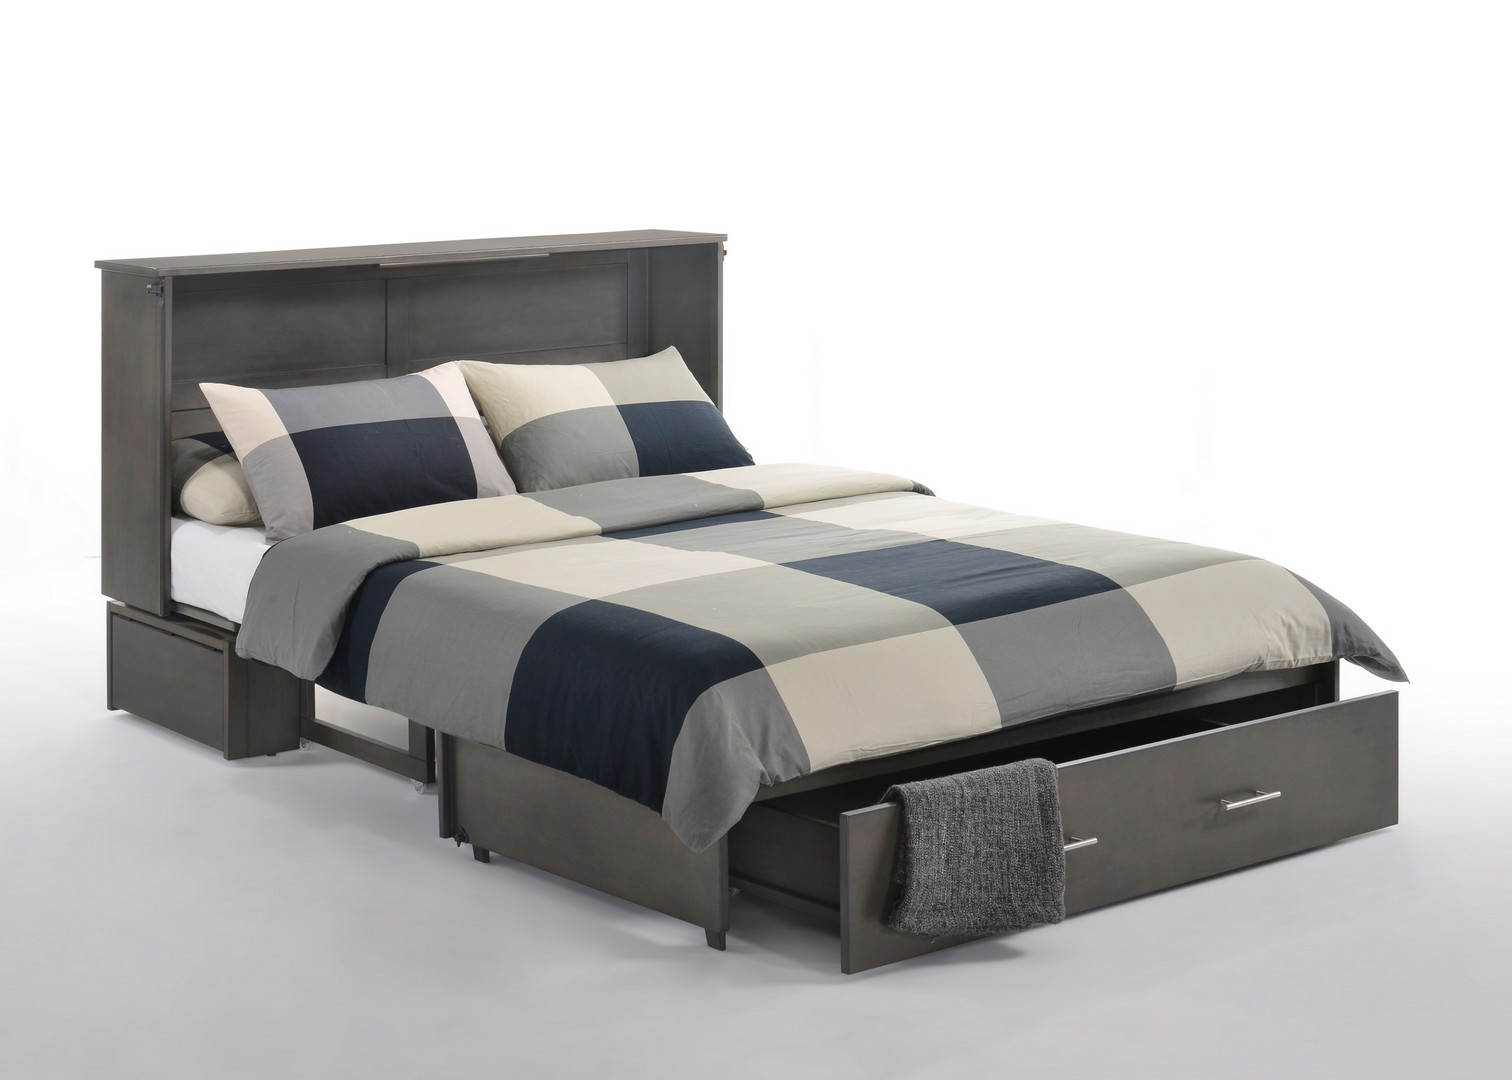 Queen Futon Cover *Limited Stock* - Murphys Furniture